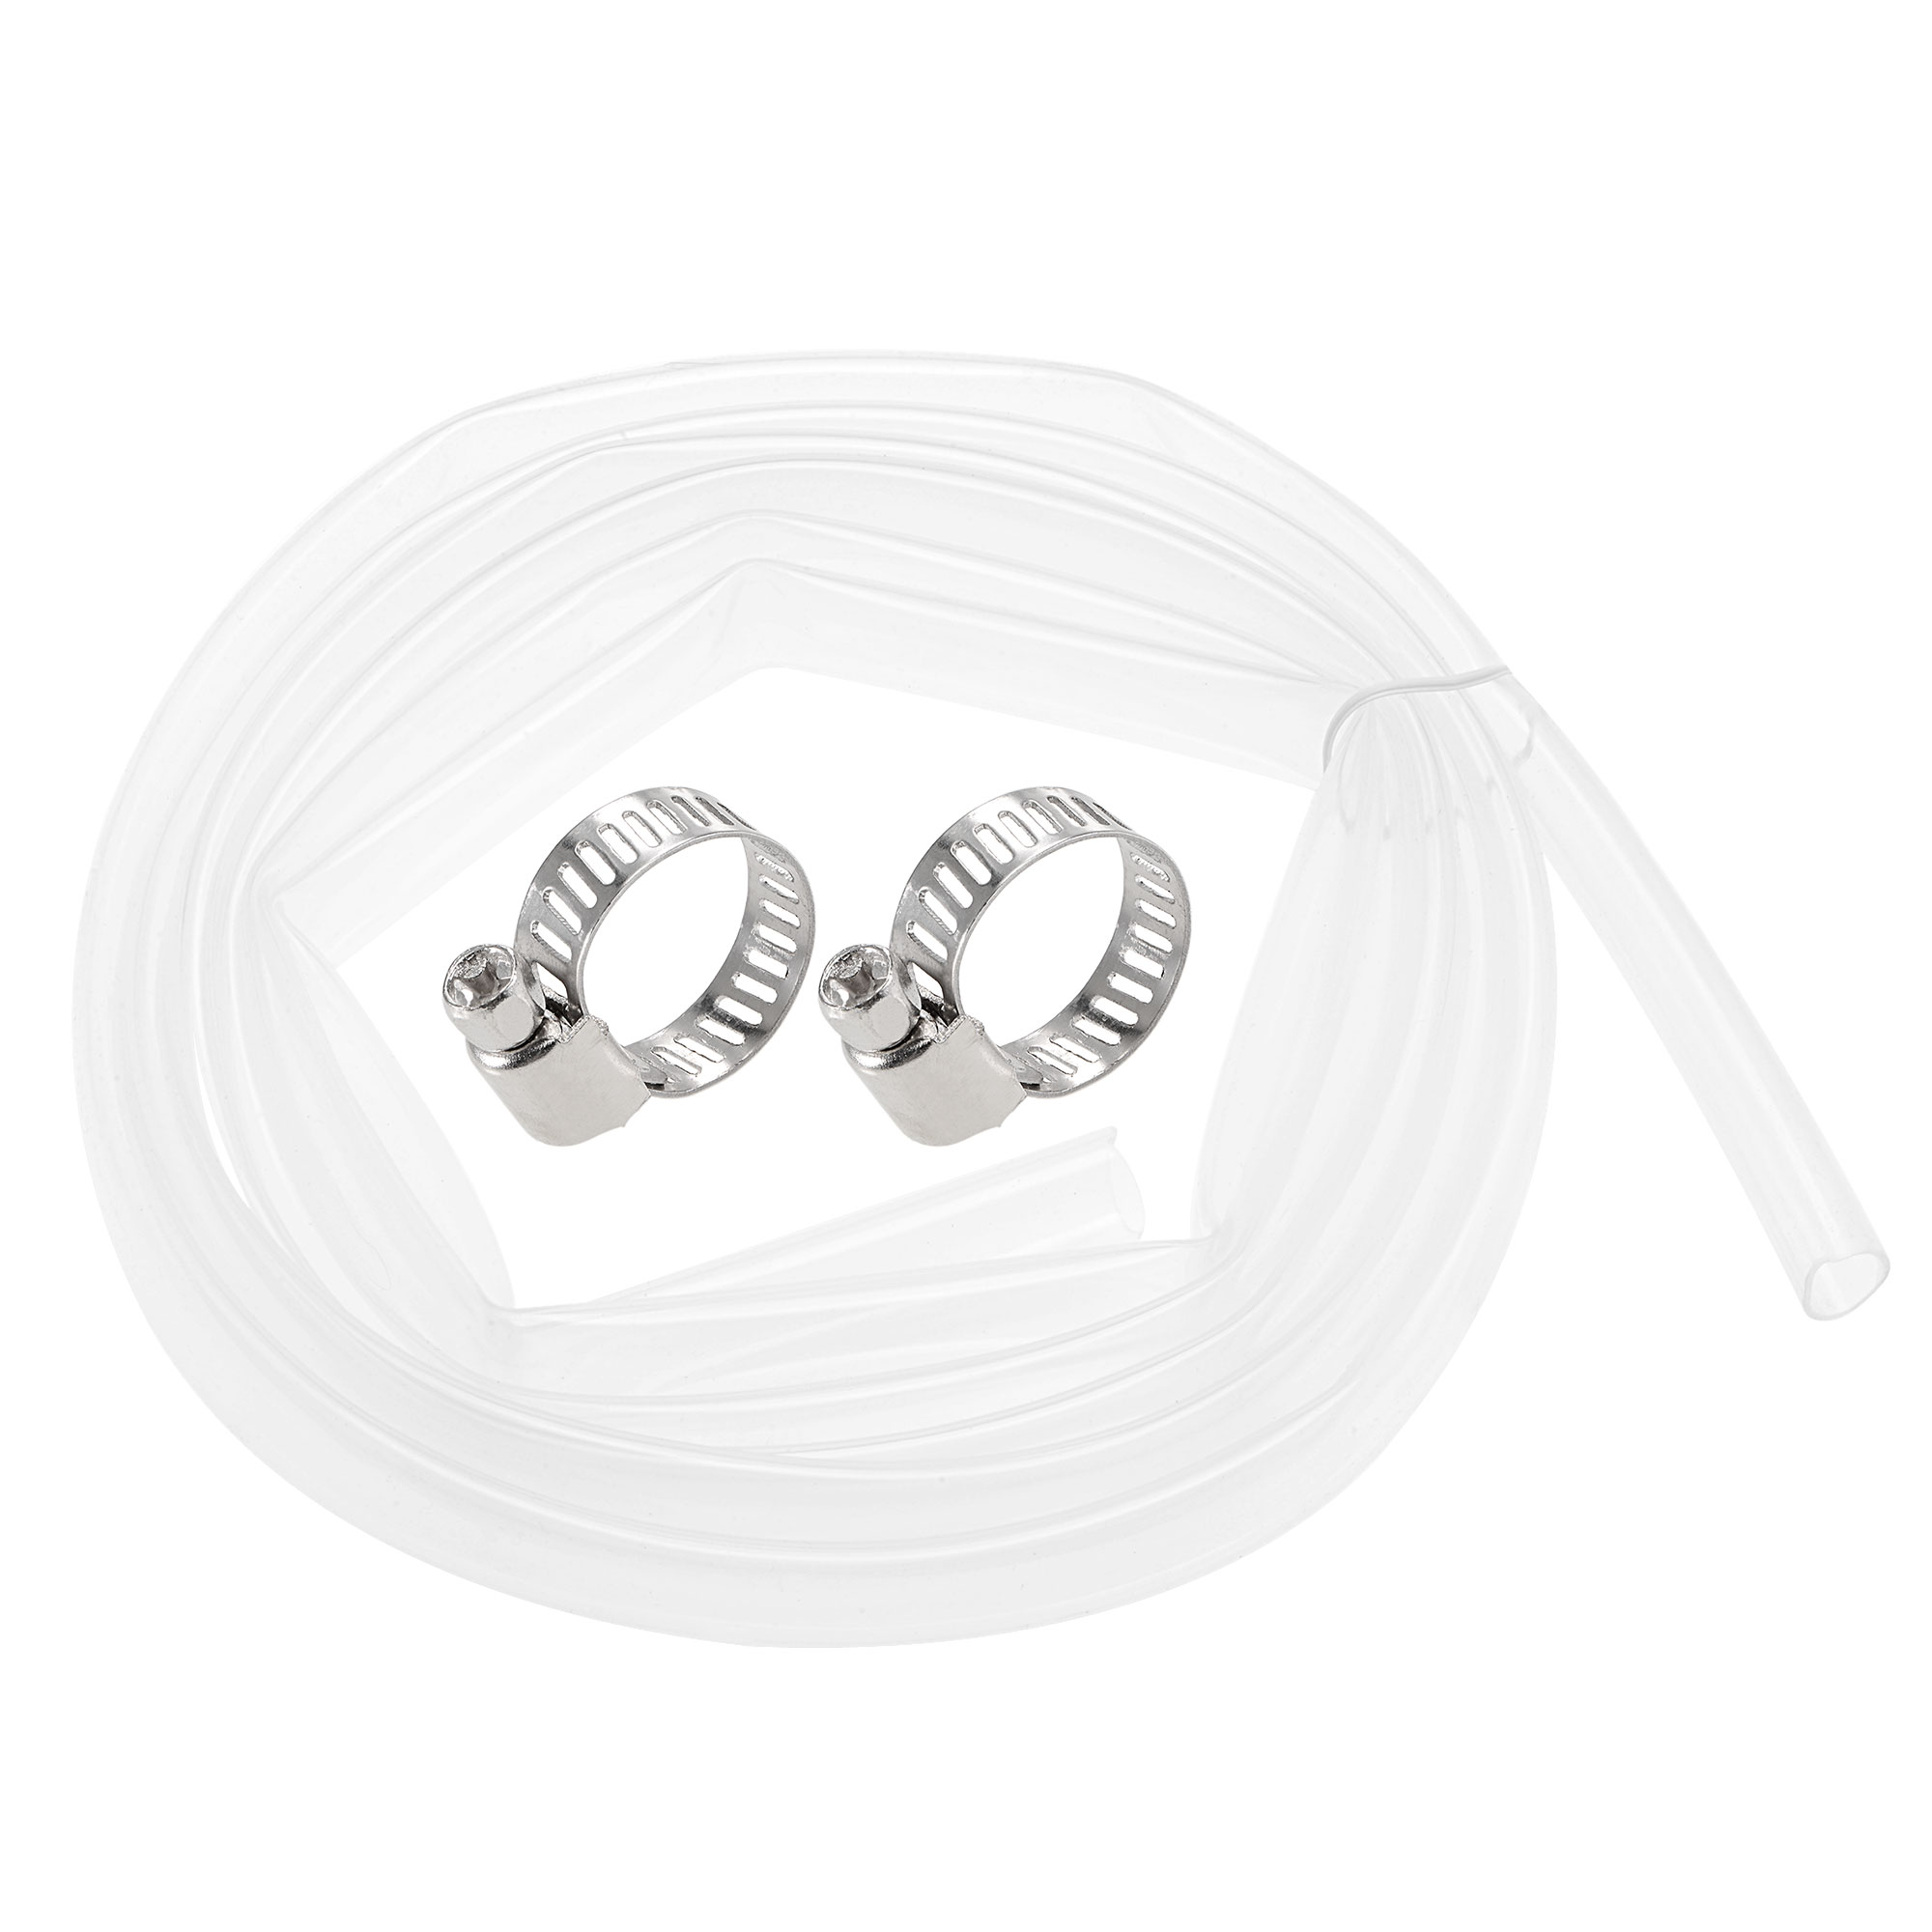 Unique Bargains Silicone Tubing 12mm ID 14mm OD 10ft Air Hose Water Pipe Clear with Clamps